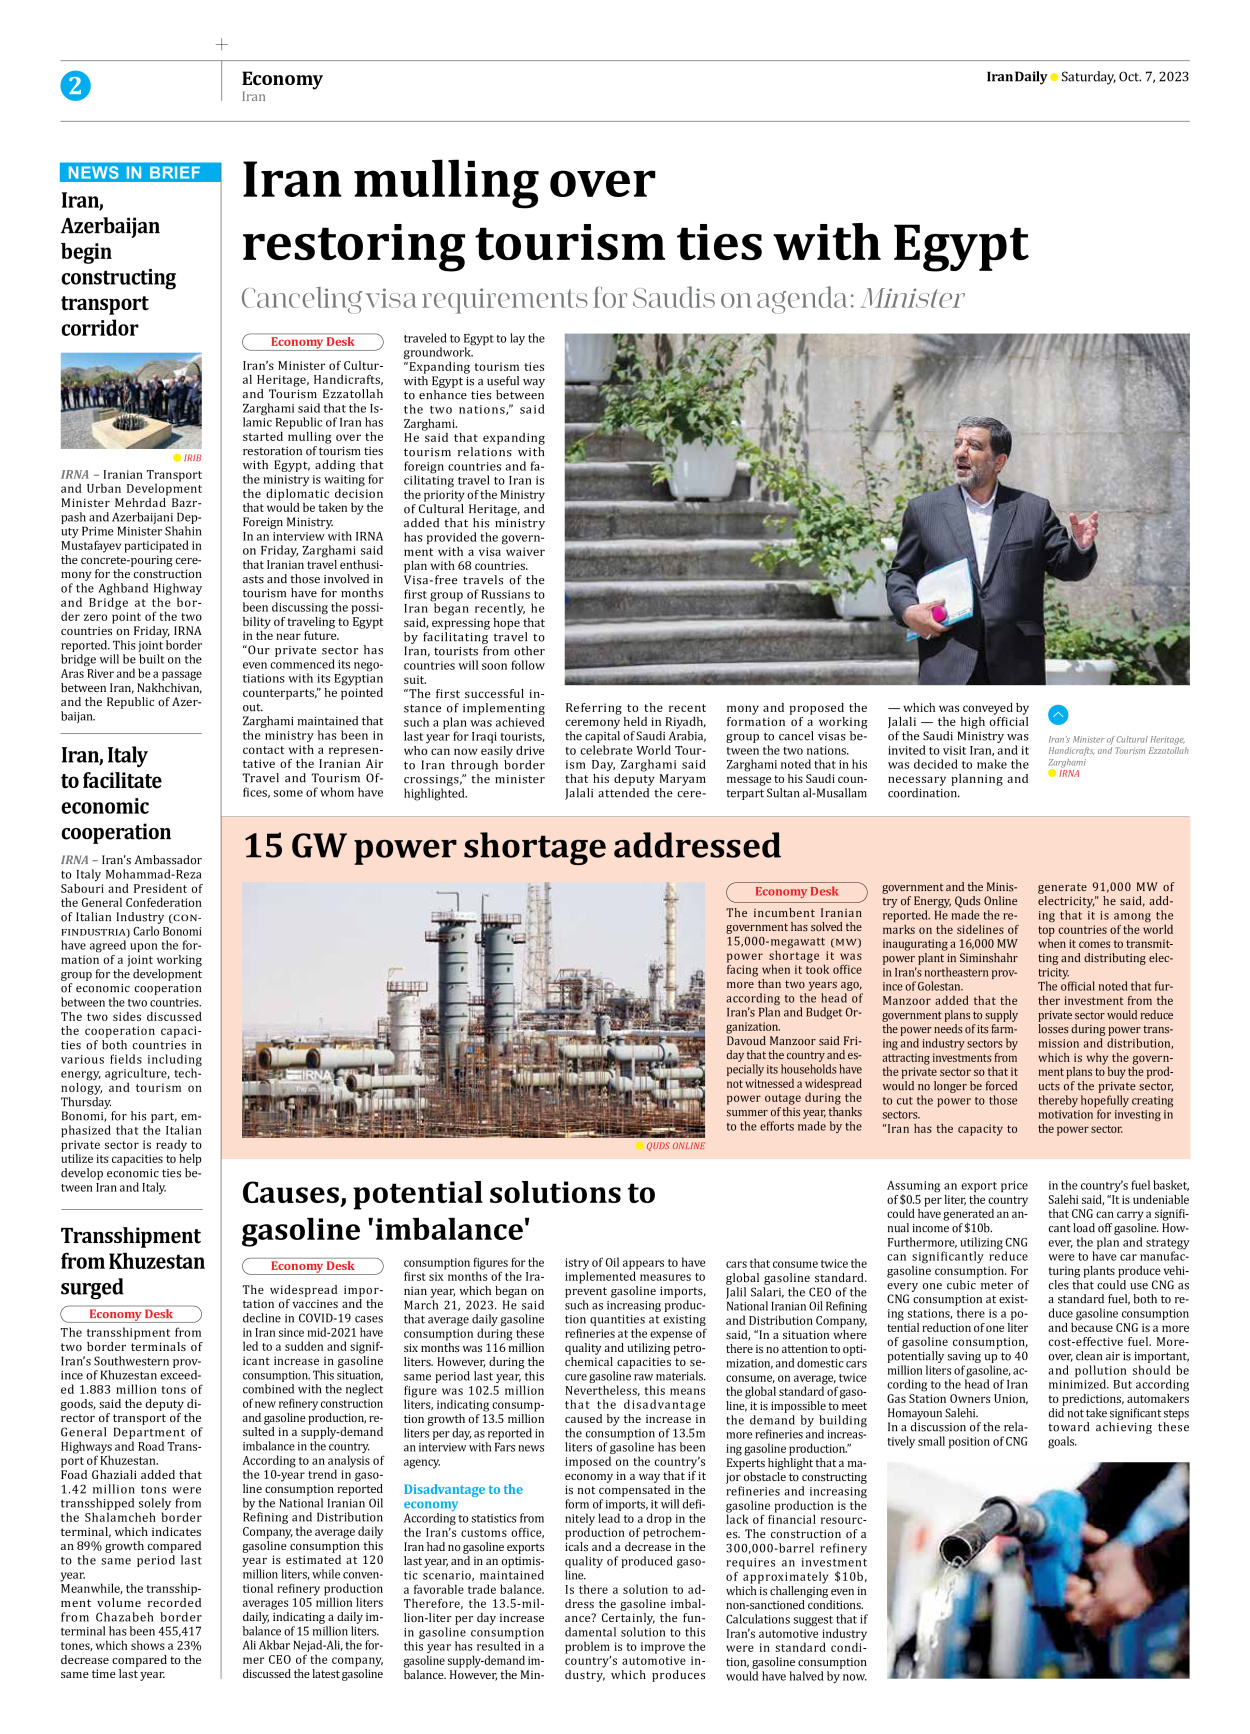 Iran Daily - Number Seven Thousand Four Hundred and One - 07 October 2023 - Page 2